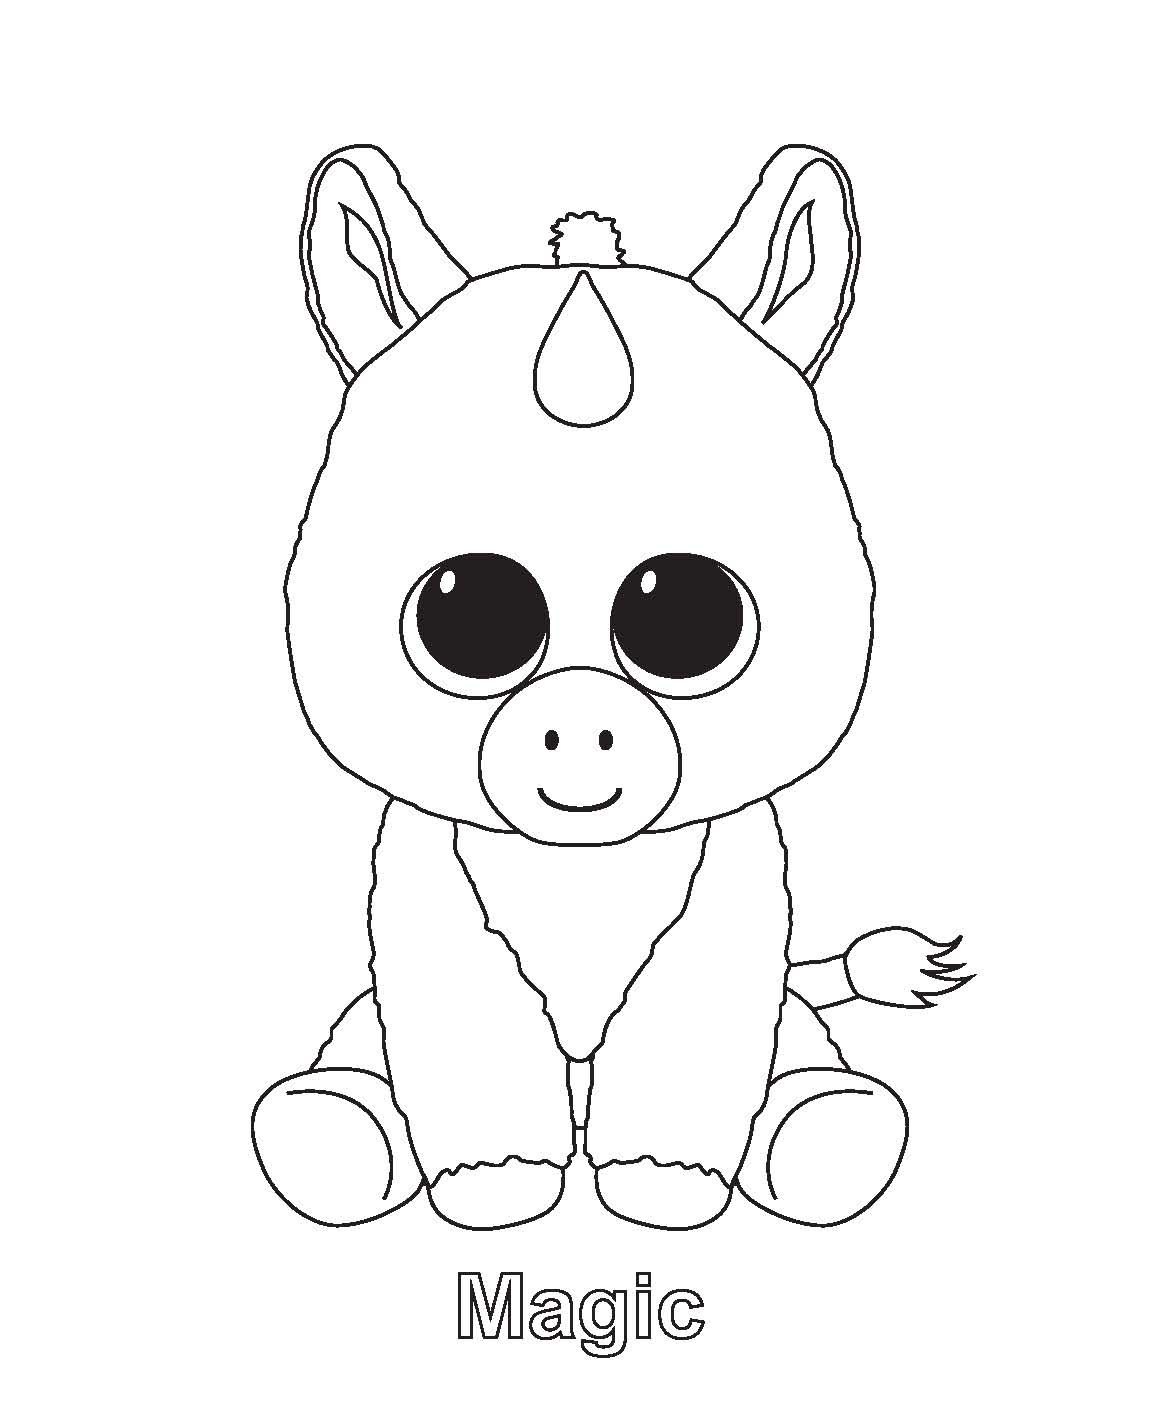 Ty Beanie Boo Coloring Pages Download And Print For Free | C's Pet - Free Printable Beanie Boo Coloring Pages